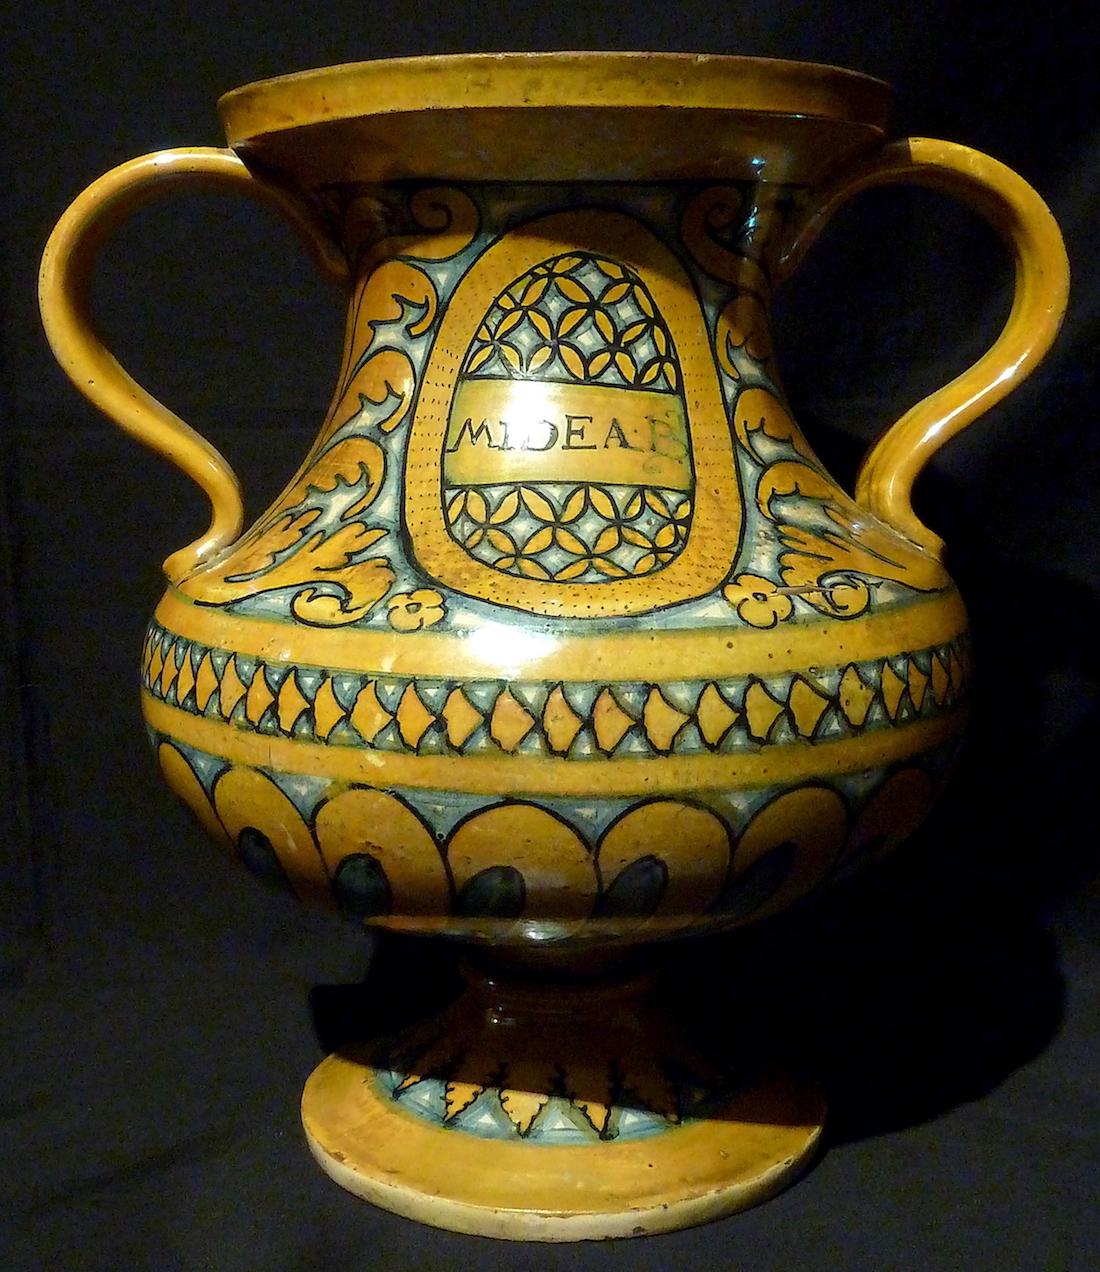 Deruta biansato vase, first half of the 16th century, Blue and yellow shiny metallic decoration, on the upper part and on each oval face with the word MIDEA on one side and SOLOMEA on the other.
Measures: Height 30 cm.